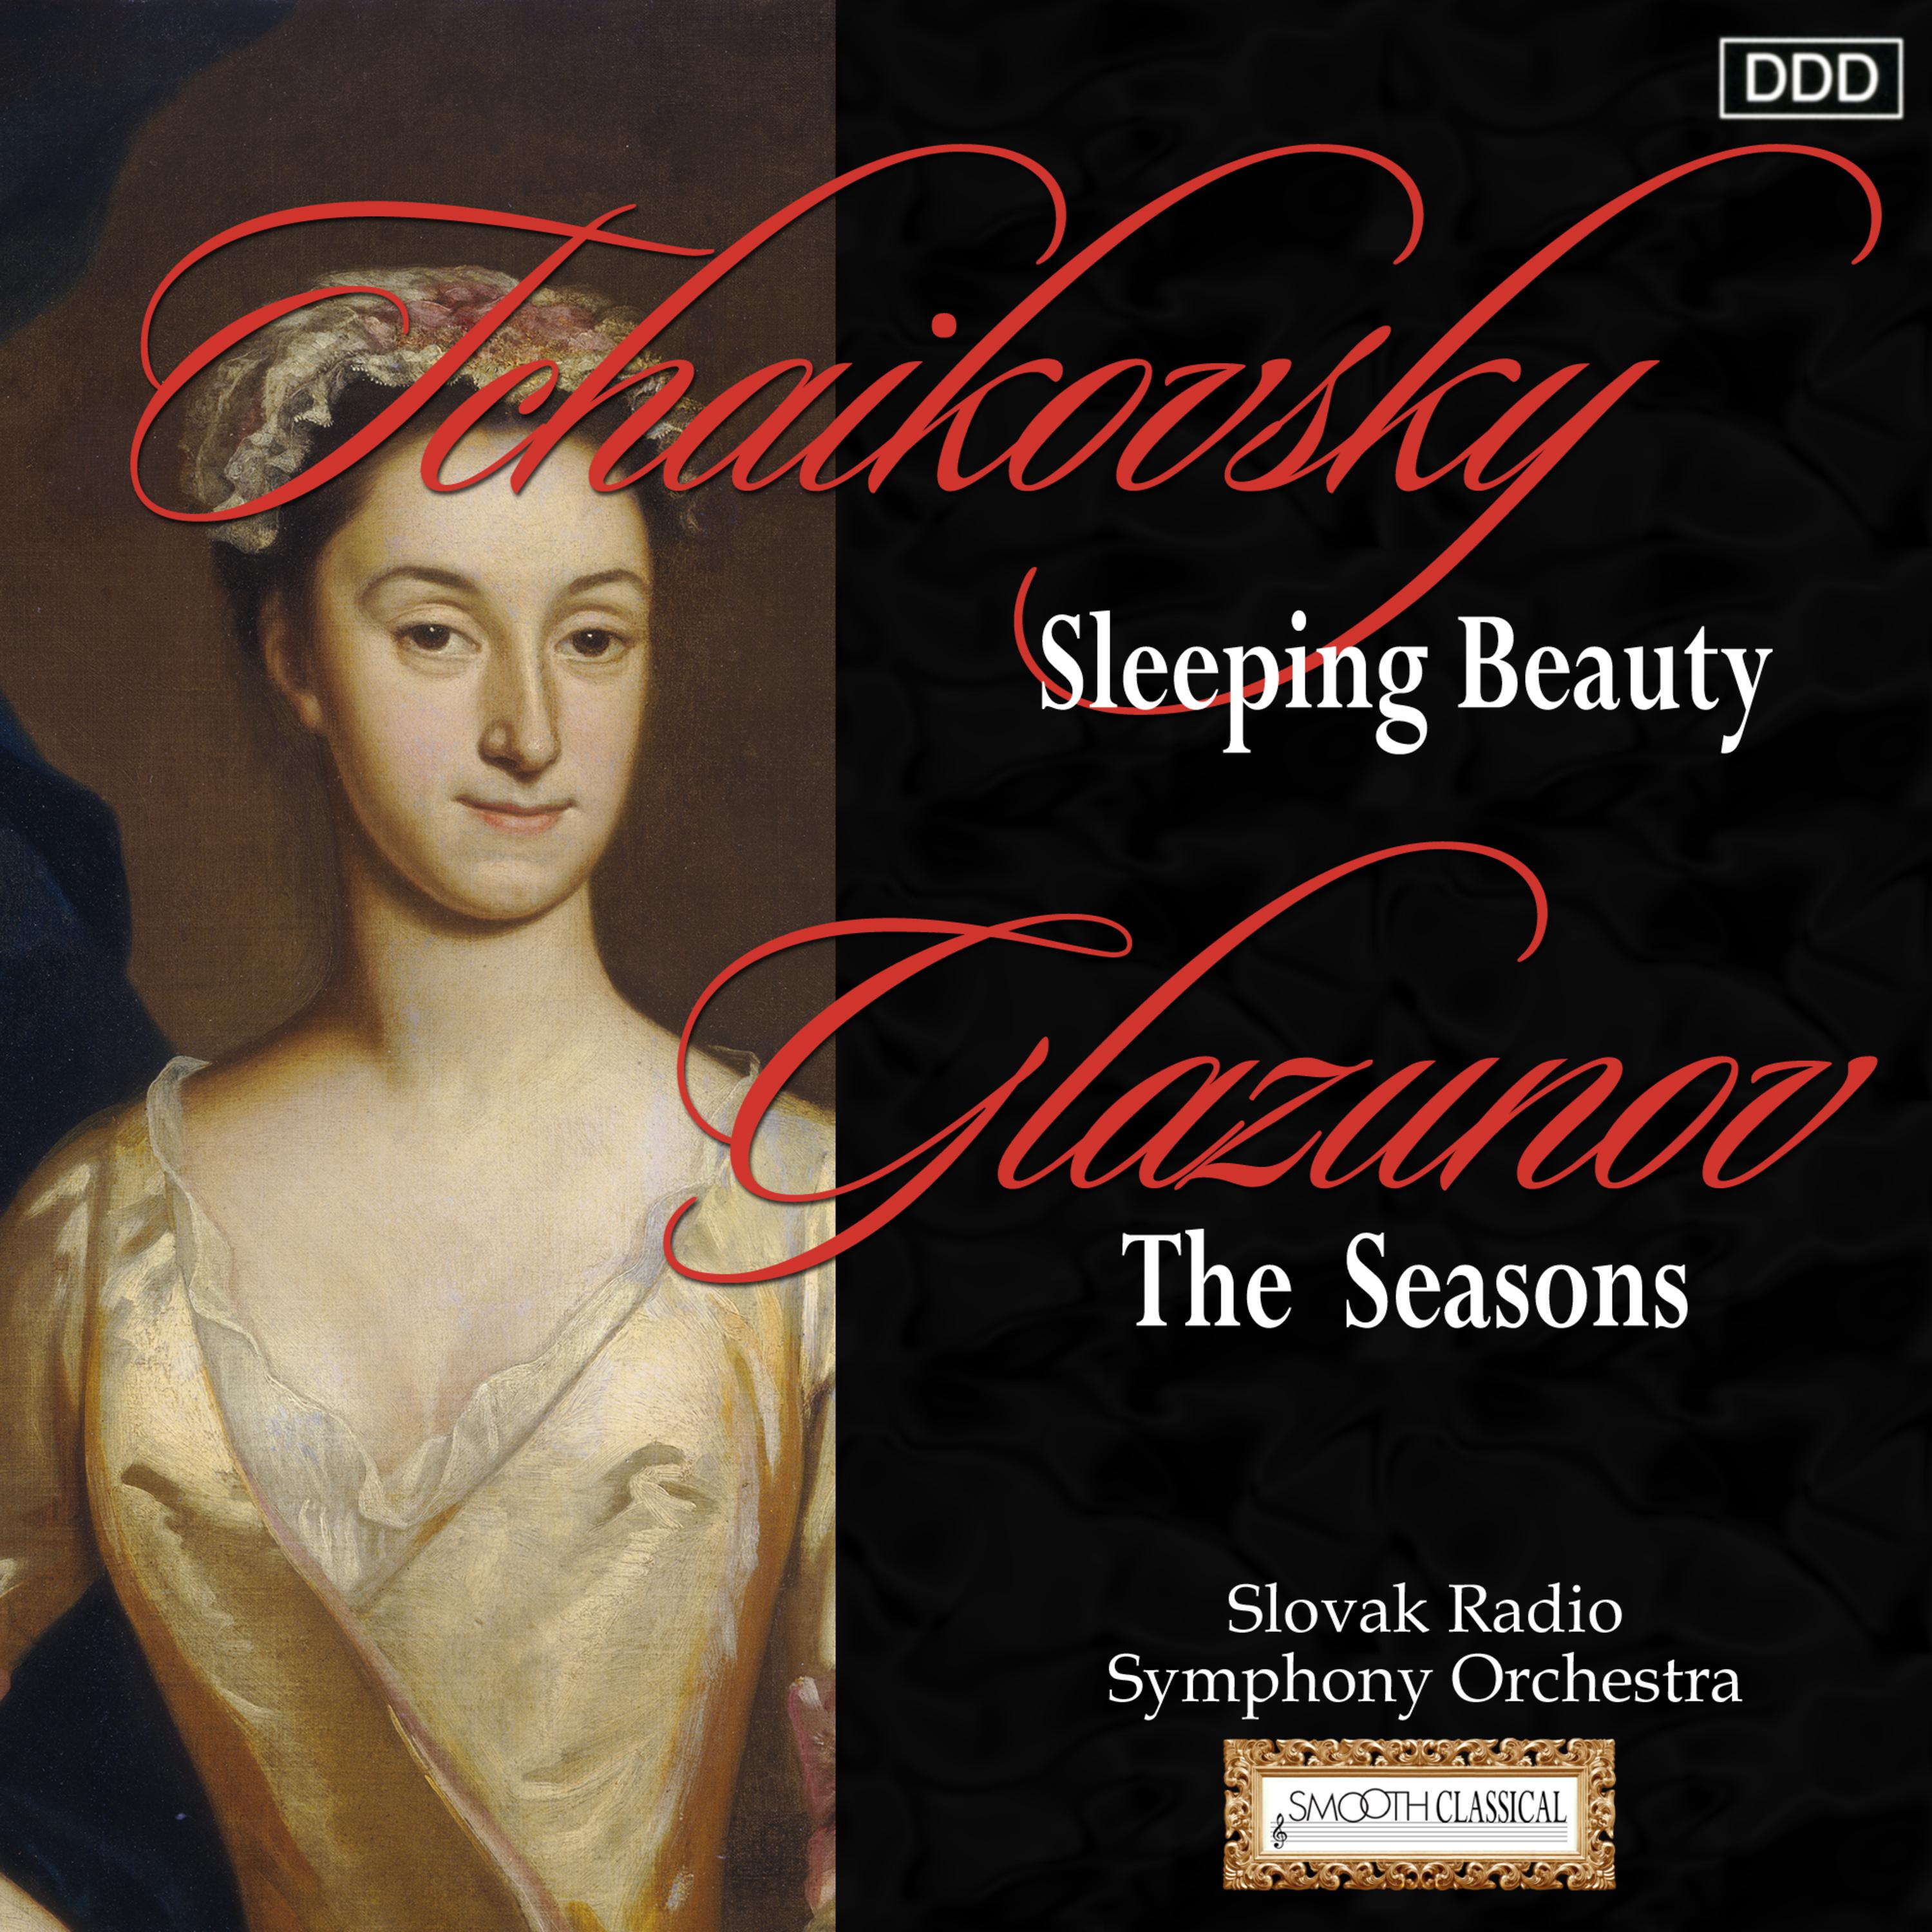 The Sleeping Beauty, Op. 66: Introduction - 'The Lilac Fairy'